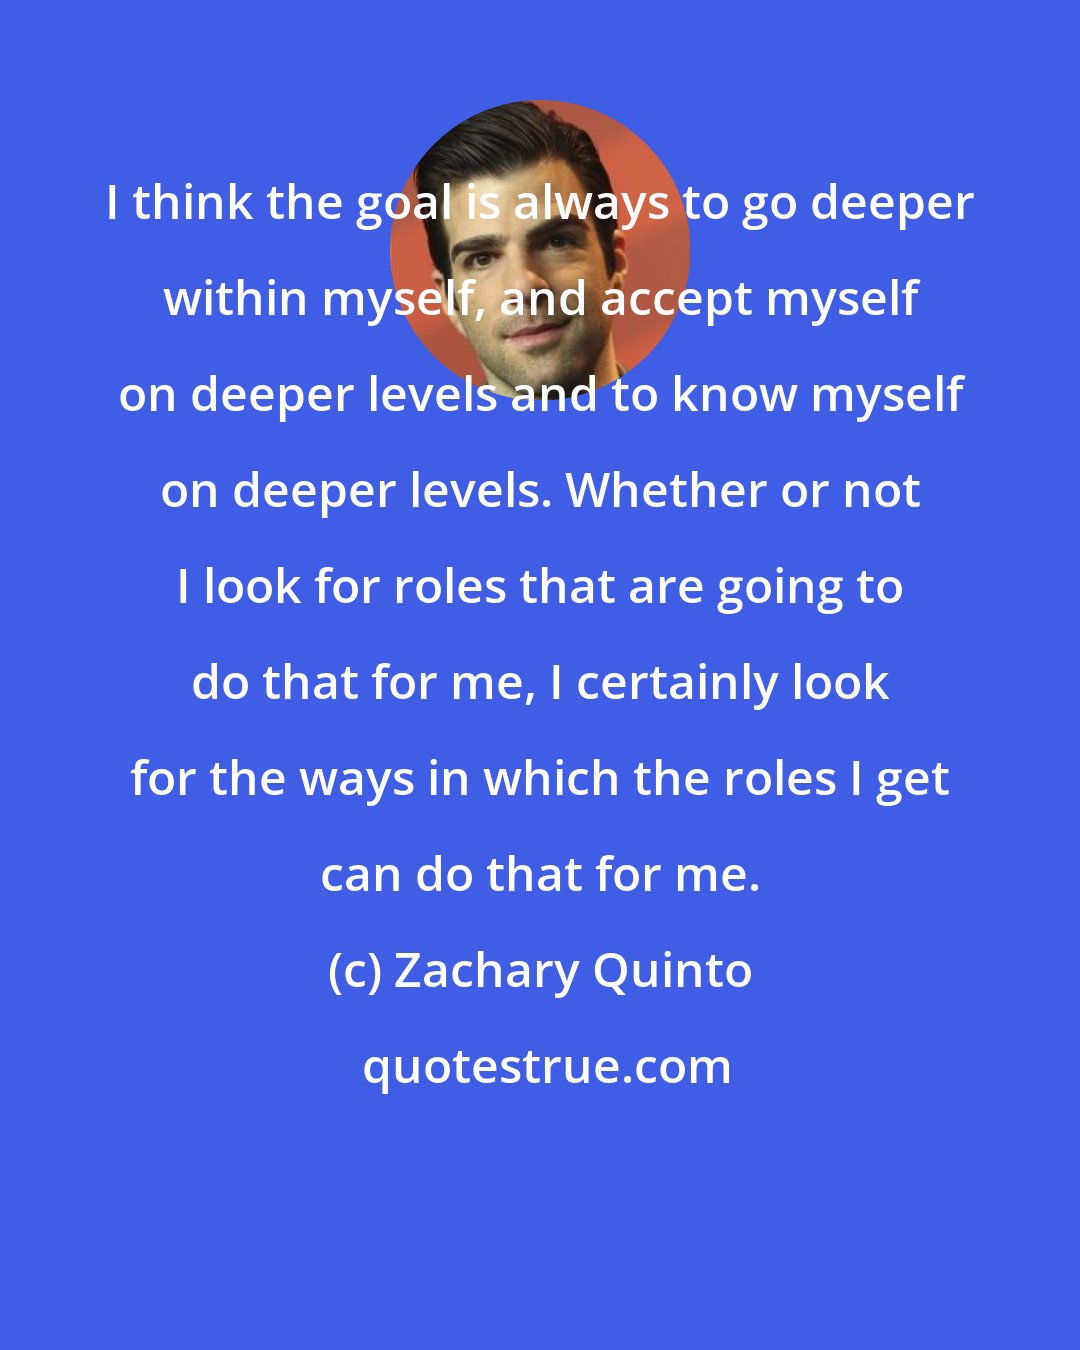 Zachary Quinto: I think the goal is always to go deeper within myself, and accept myself on deeper levels and to know myself on deeper levels. Whether or not I look for roles that are going to do that for me, I certainly look for the ways in which the roles I get can do that for me.